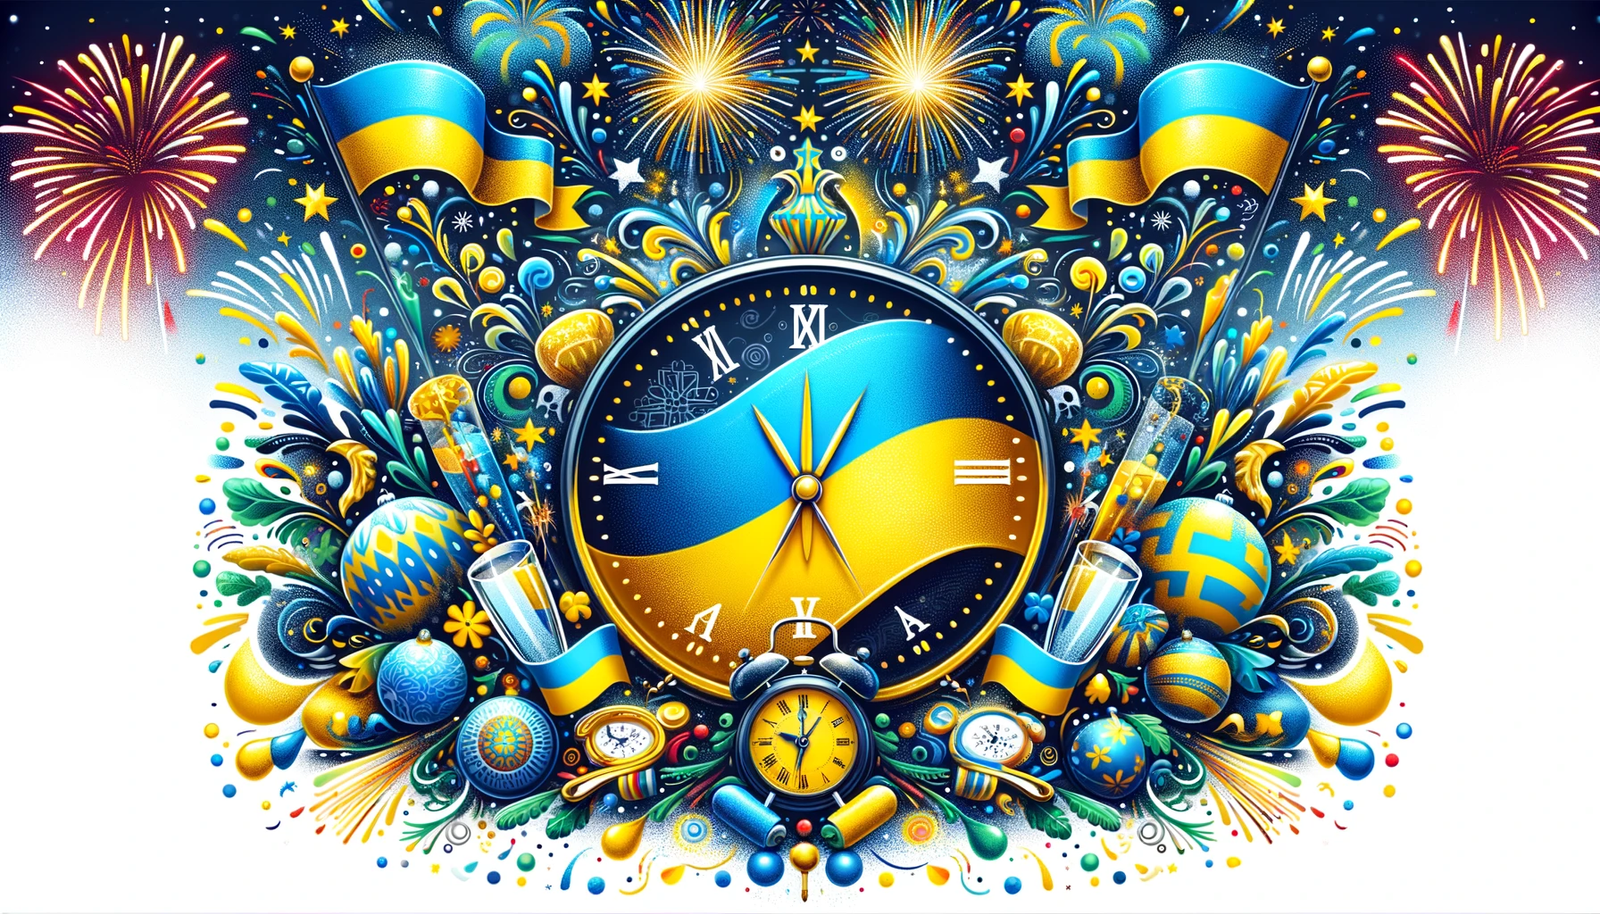 The «Yellow-Blue» Charitable Foundation wishes friends, partners and clients a Happy New Year!